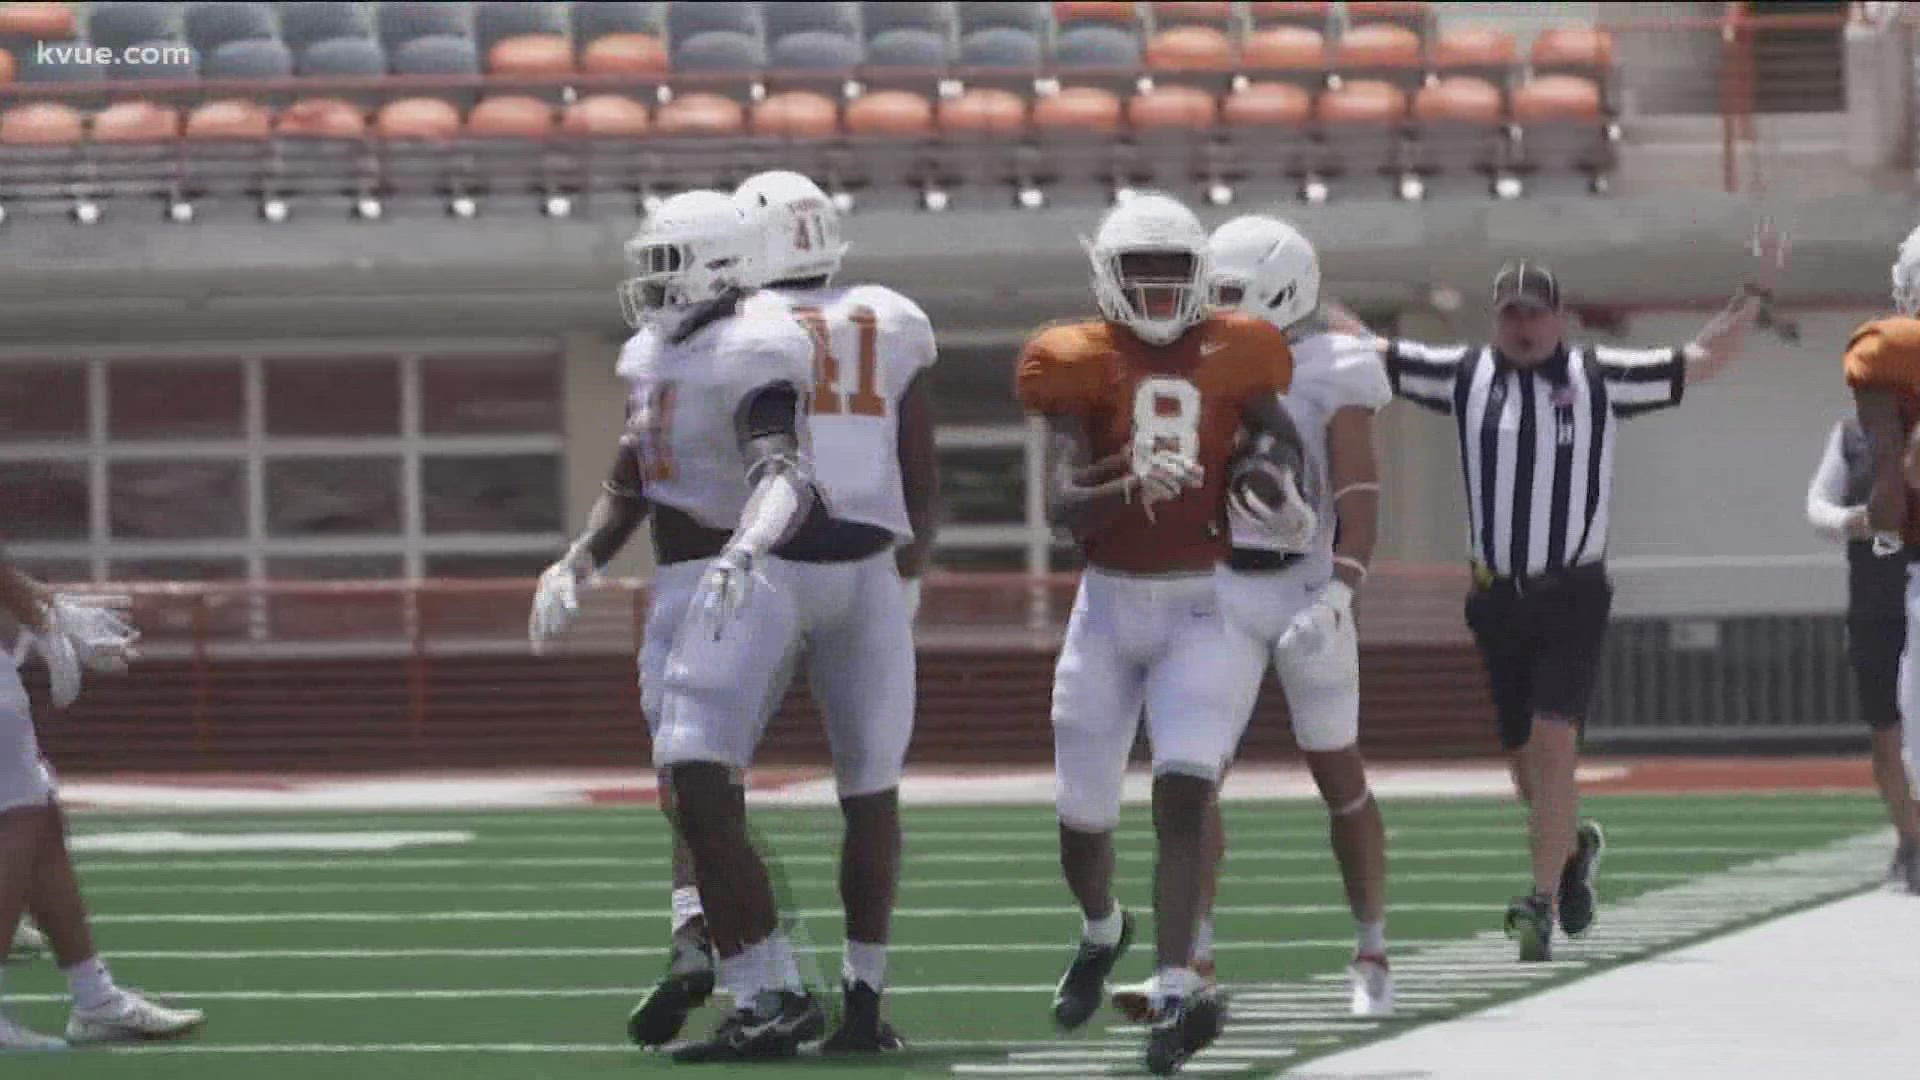 UT held its first scrimmage on Saturday Aug. 14 under new head coach Steve Sarkisian. Coach Sark said he was impressed with how the defense performed.